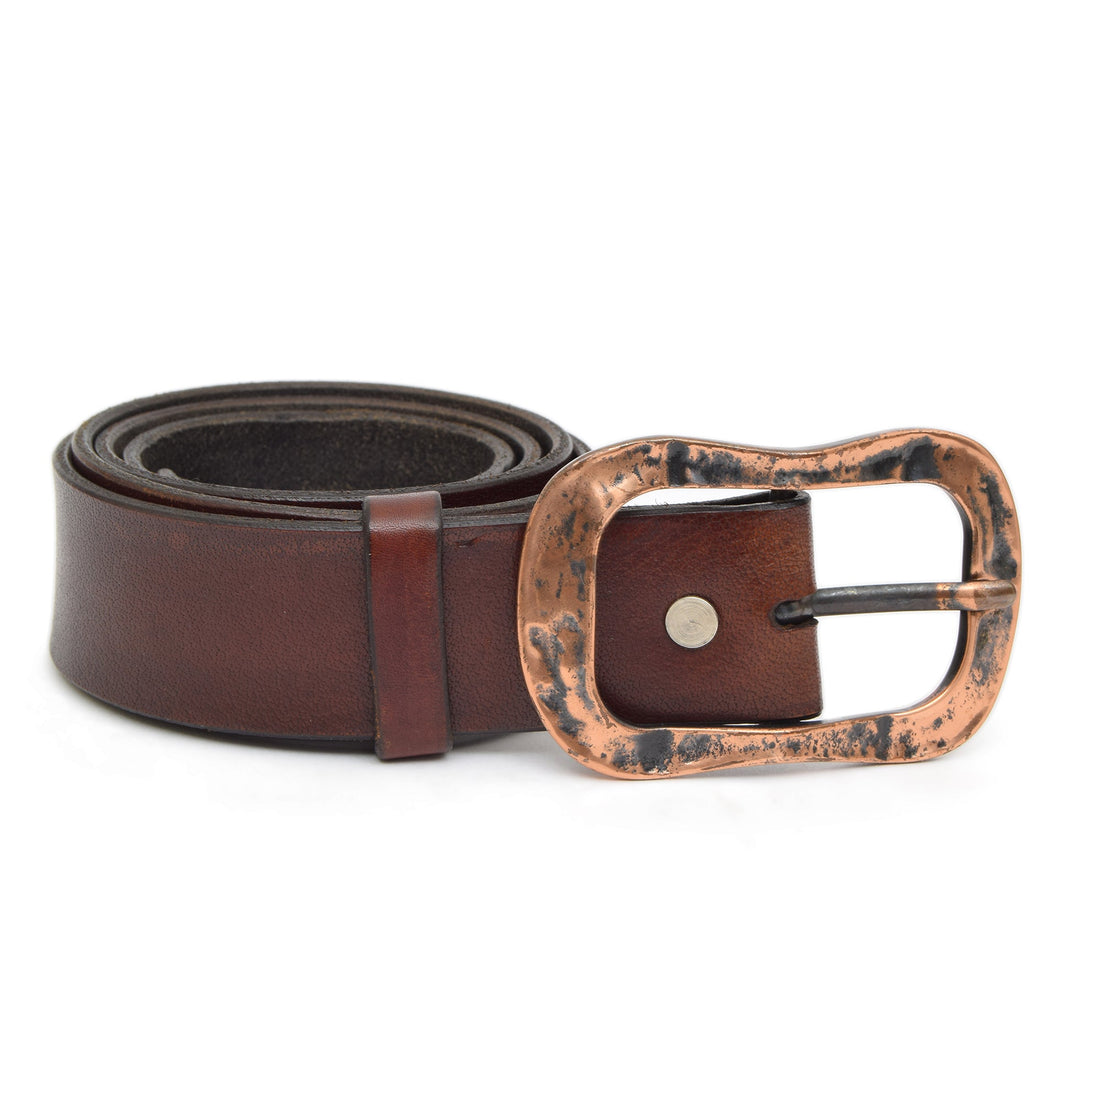 Mausolos Vintage Leather Belt Chestnut Brown with Changeable Buckle - Belts Zengoda Shop online from Artisan Brands